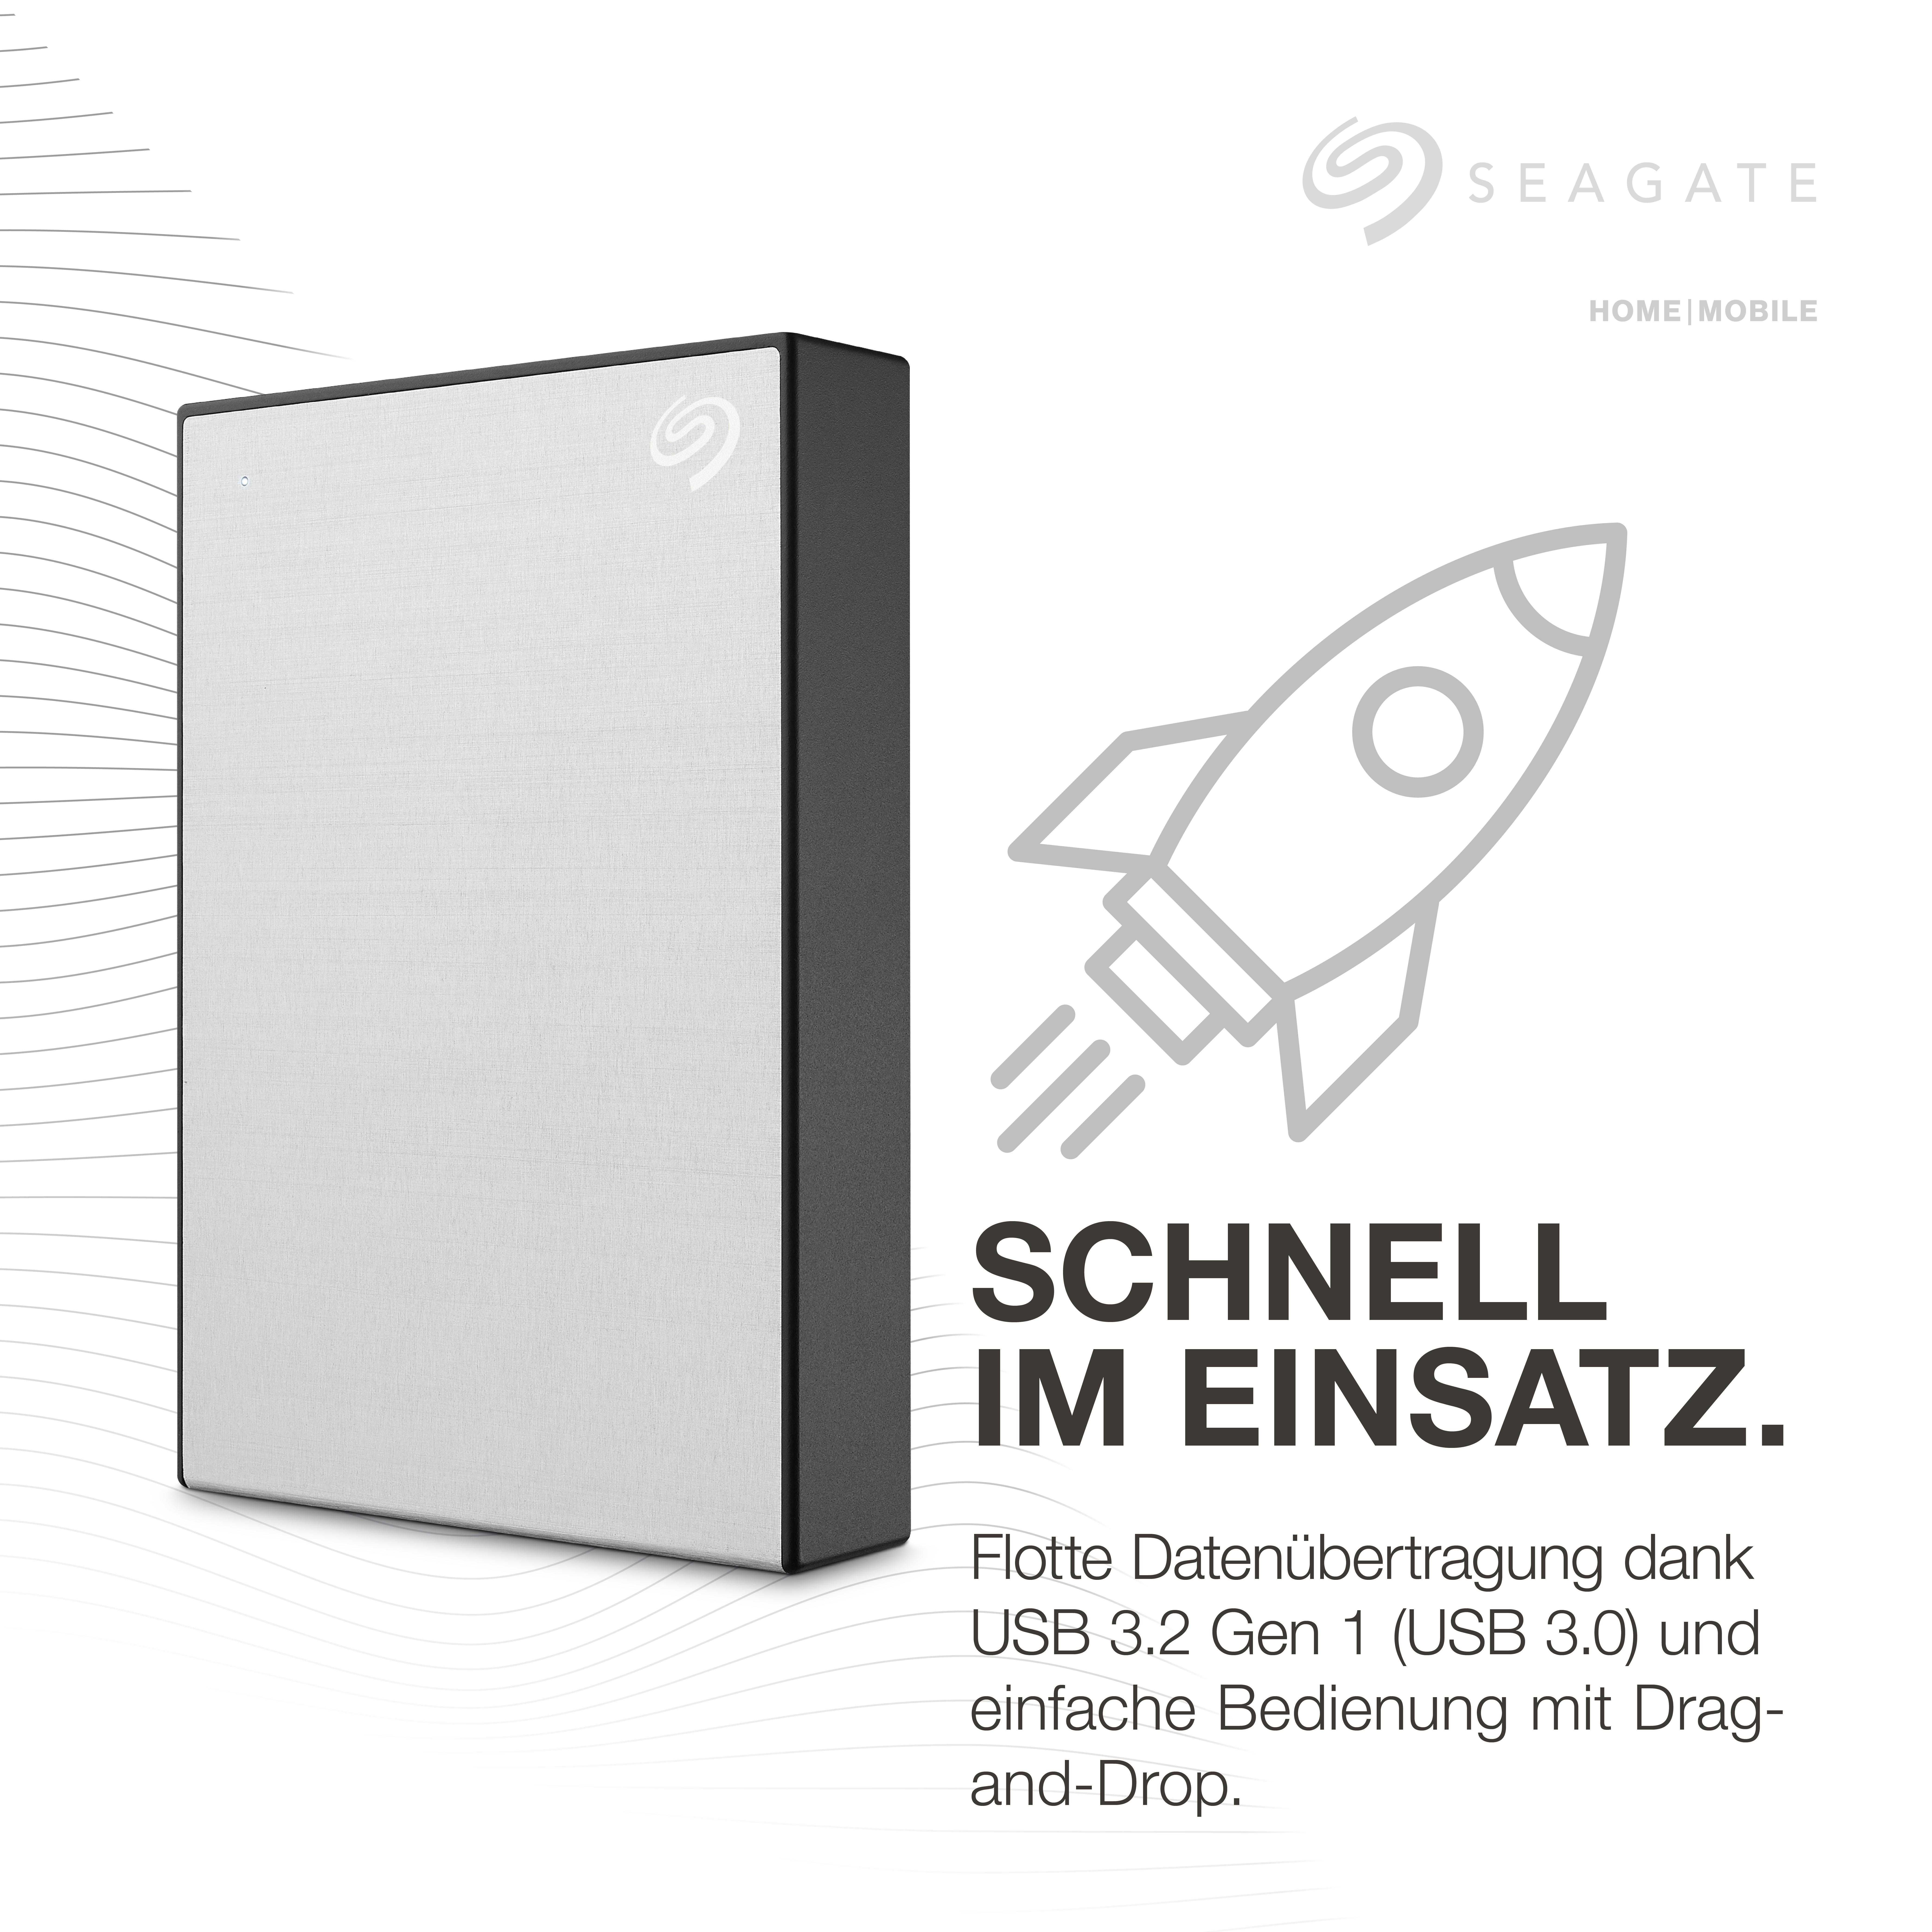 SEAGATE One Touch 2,5 HDD, Zoll, Silber mobile TB Festplatte, extern, 5